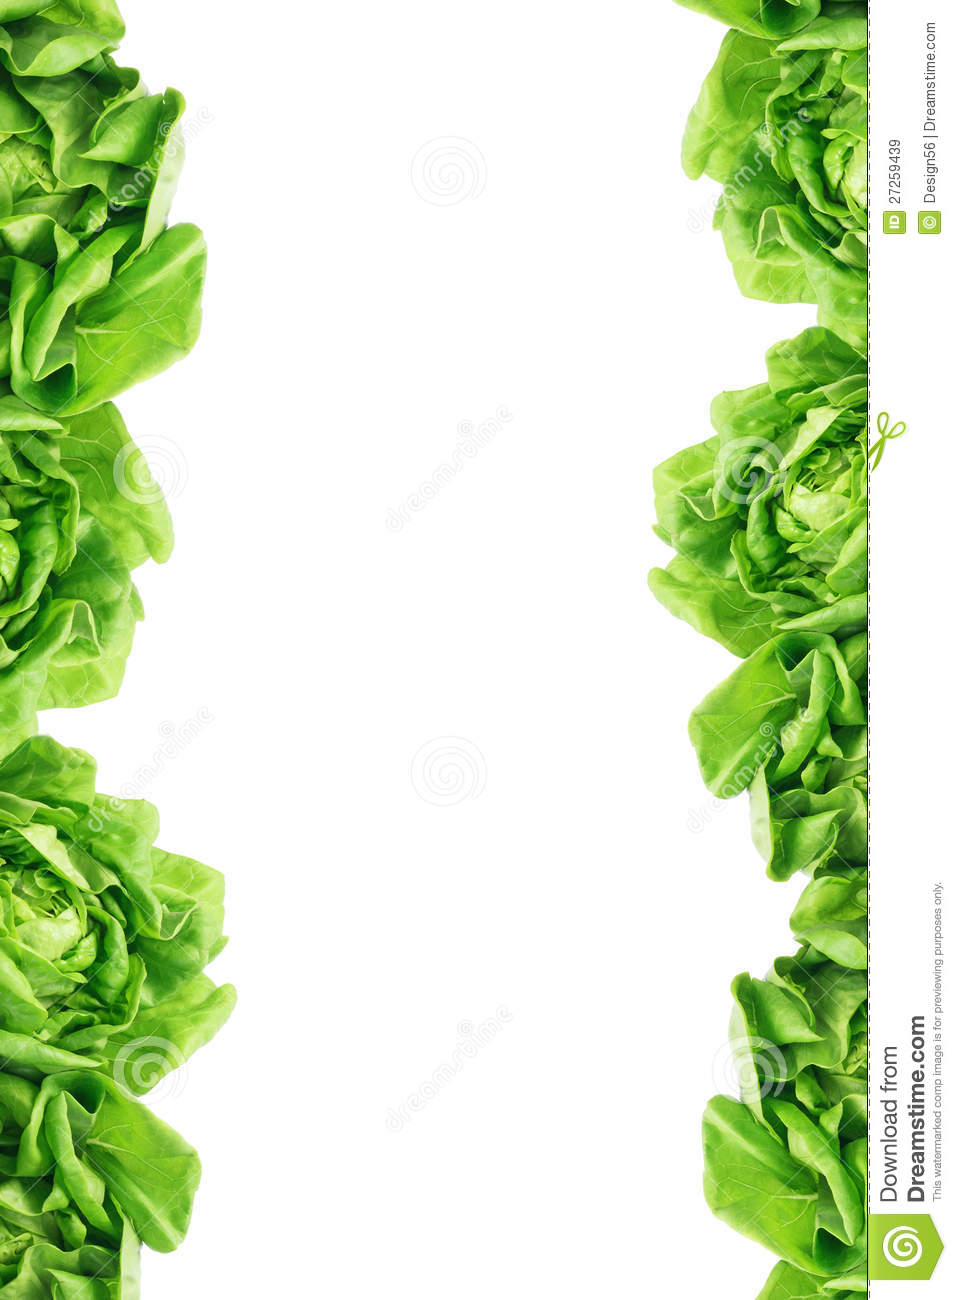 Green Leaves Border Royalty Free Stock Images   Image  27259439